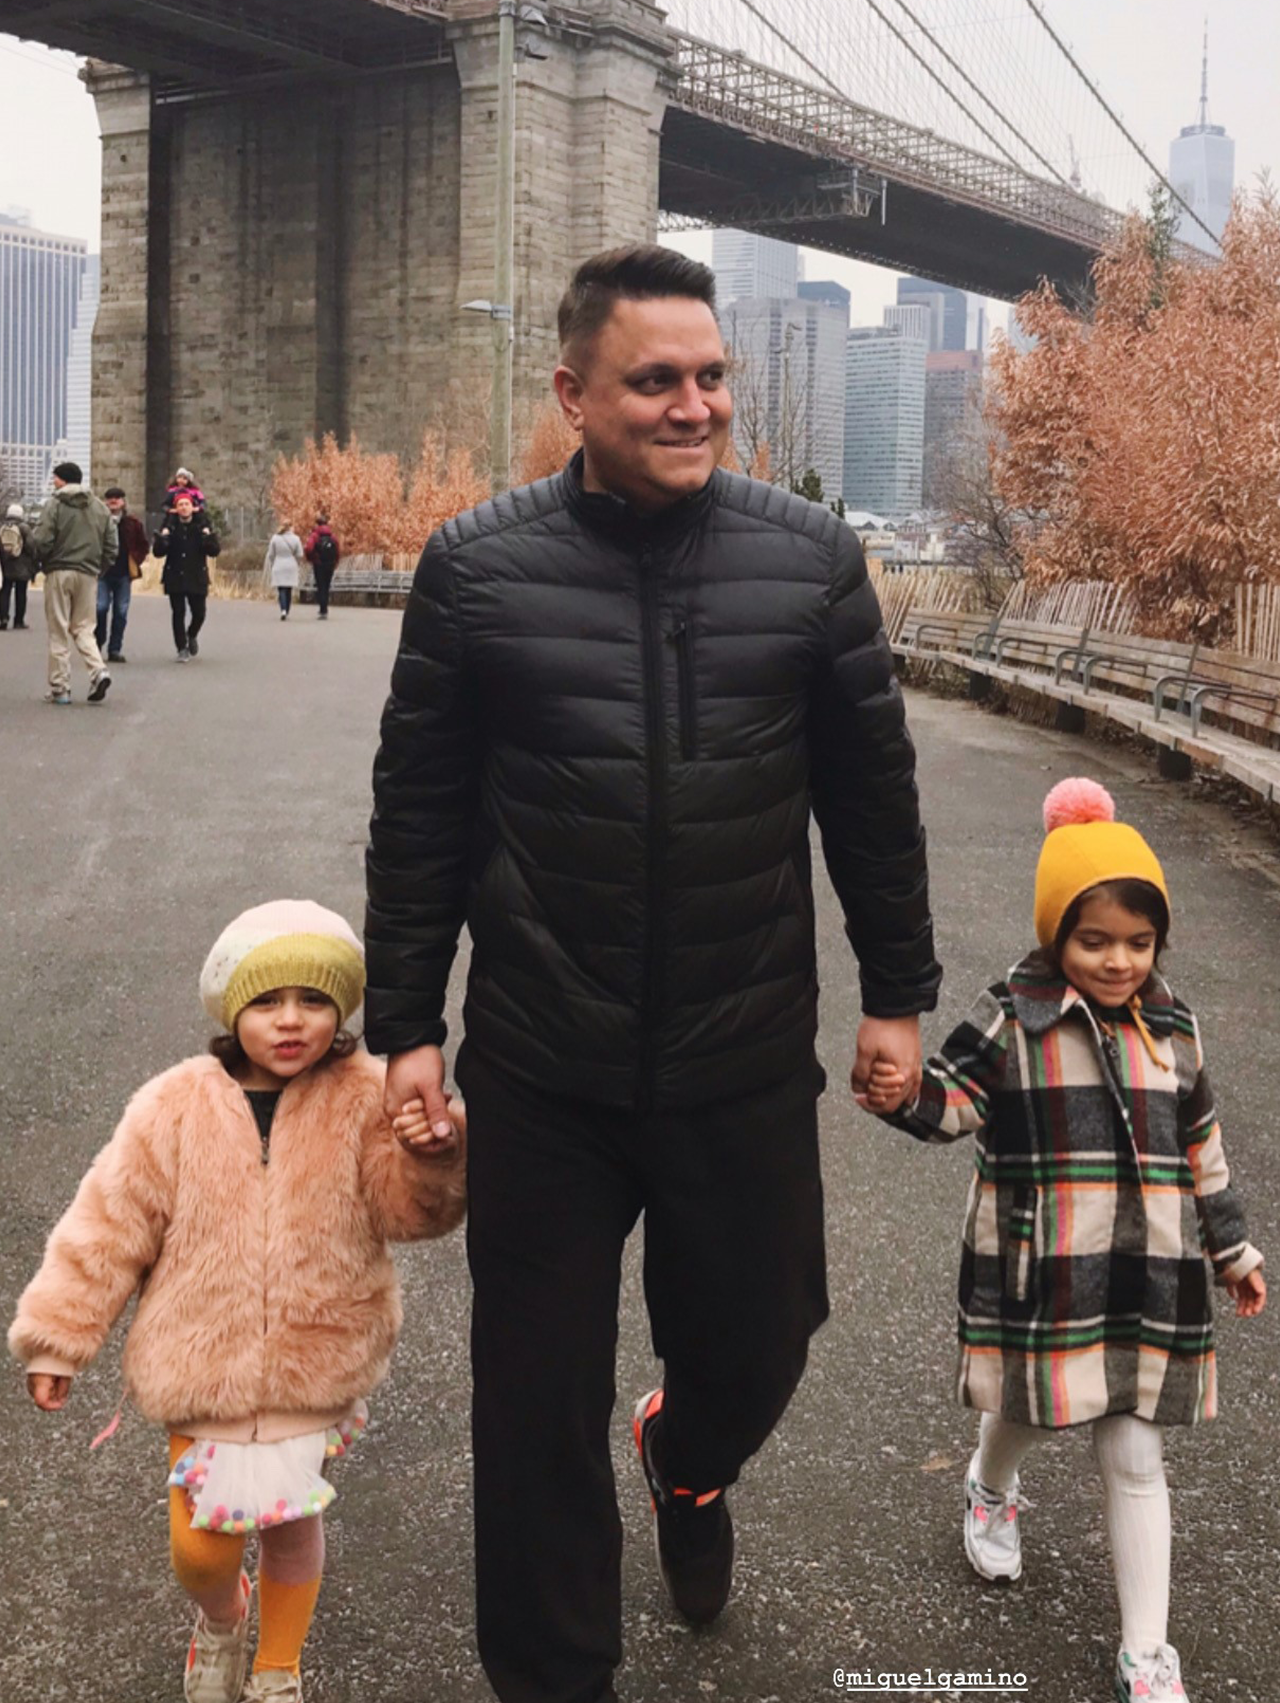 Miguel Gamiño Jr. with his daughters Mariana, 4, left, and Mia, 5, near the Brooklyn Bridge.